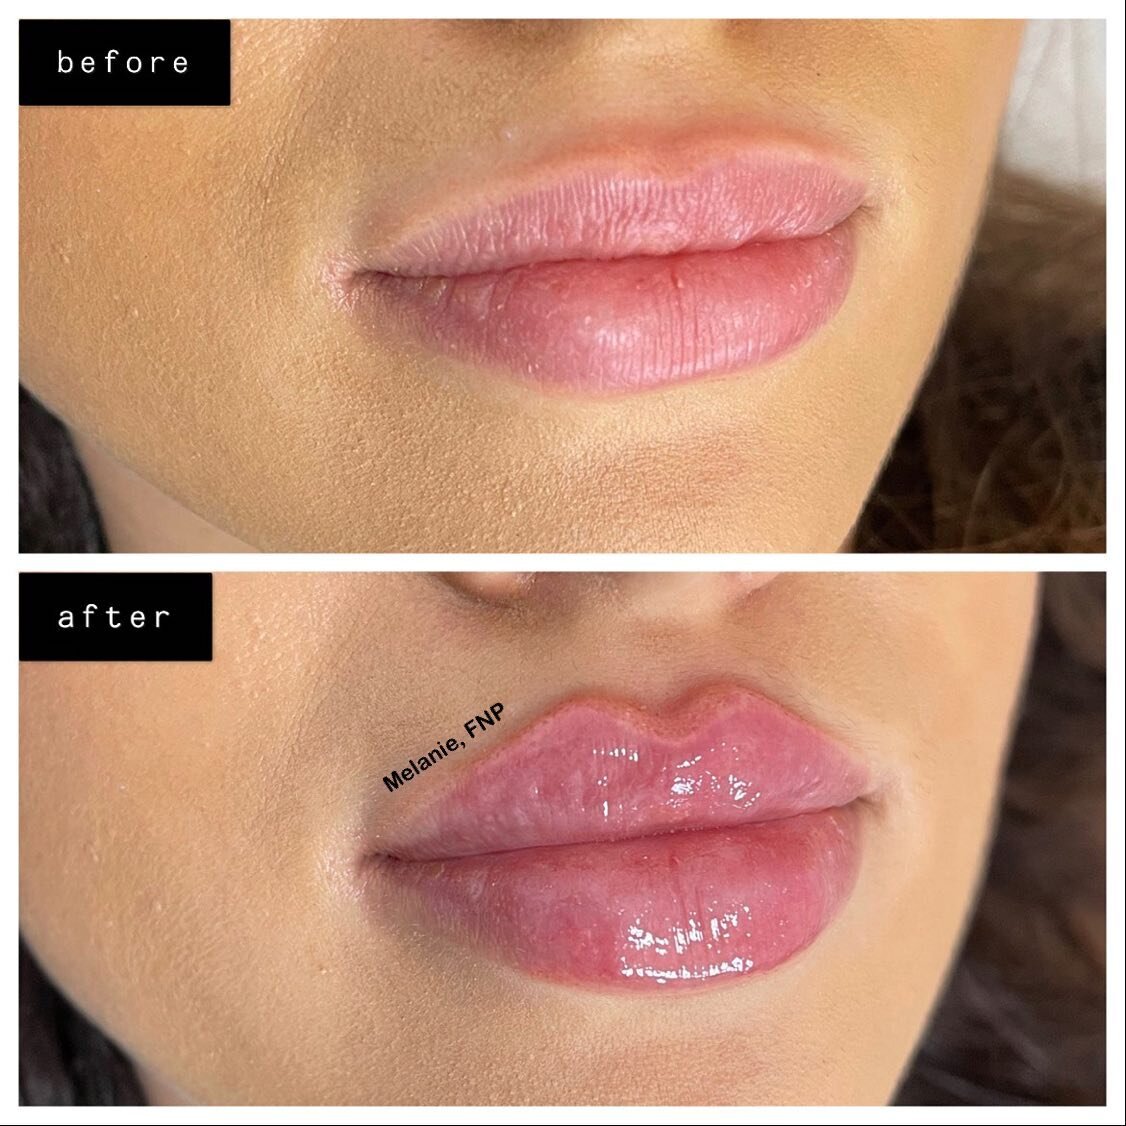 ✅ASYMMETRY CORRECTION
✅BORDER REFINEMENT
✅RUSSIAN LIPS

What do you guys think of these results?😻⬇️

#Juvederm#Restylane#Voluma#Botox#Dysport#Kybella#aesthetics#dermalfiller#lipaugmentation#noseaugmentation#chinaugmentation#cheekenhancement#undereye